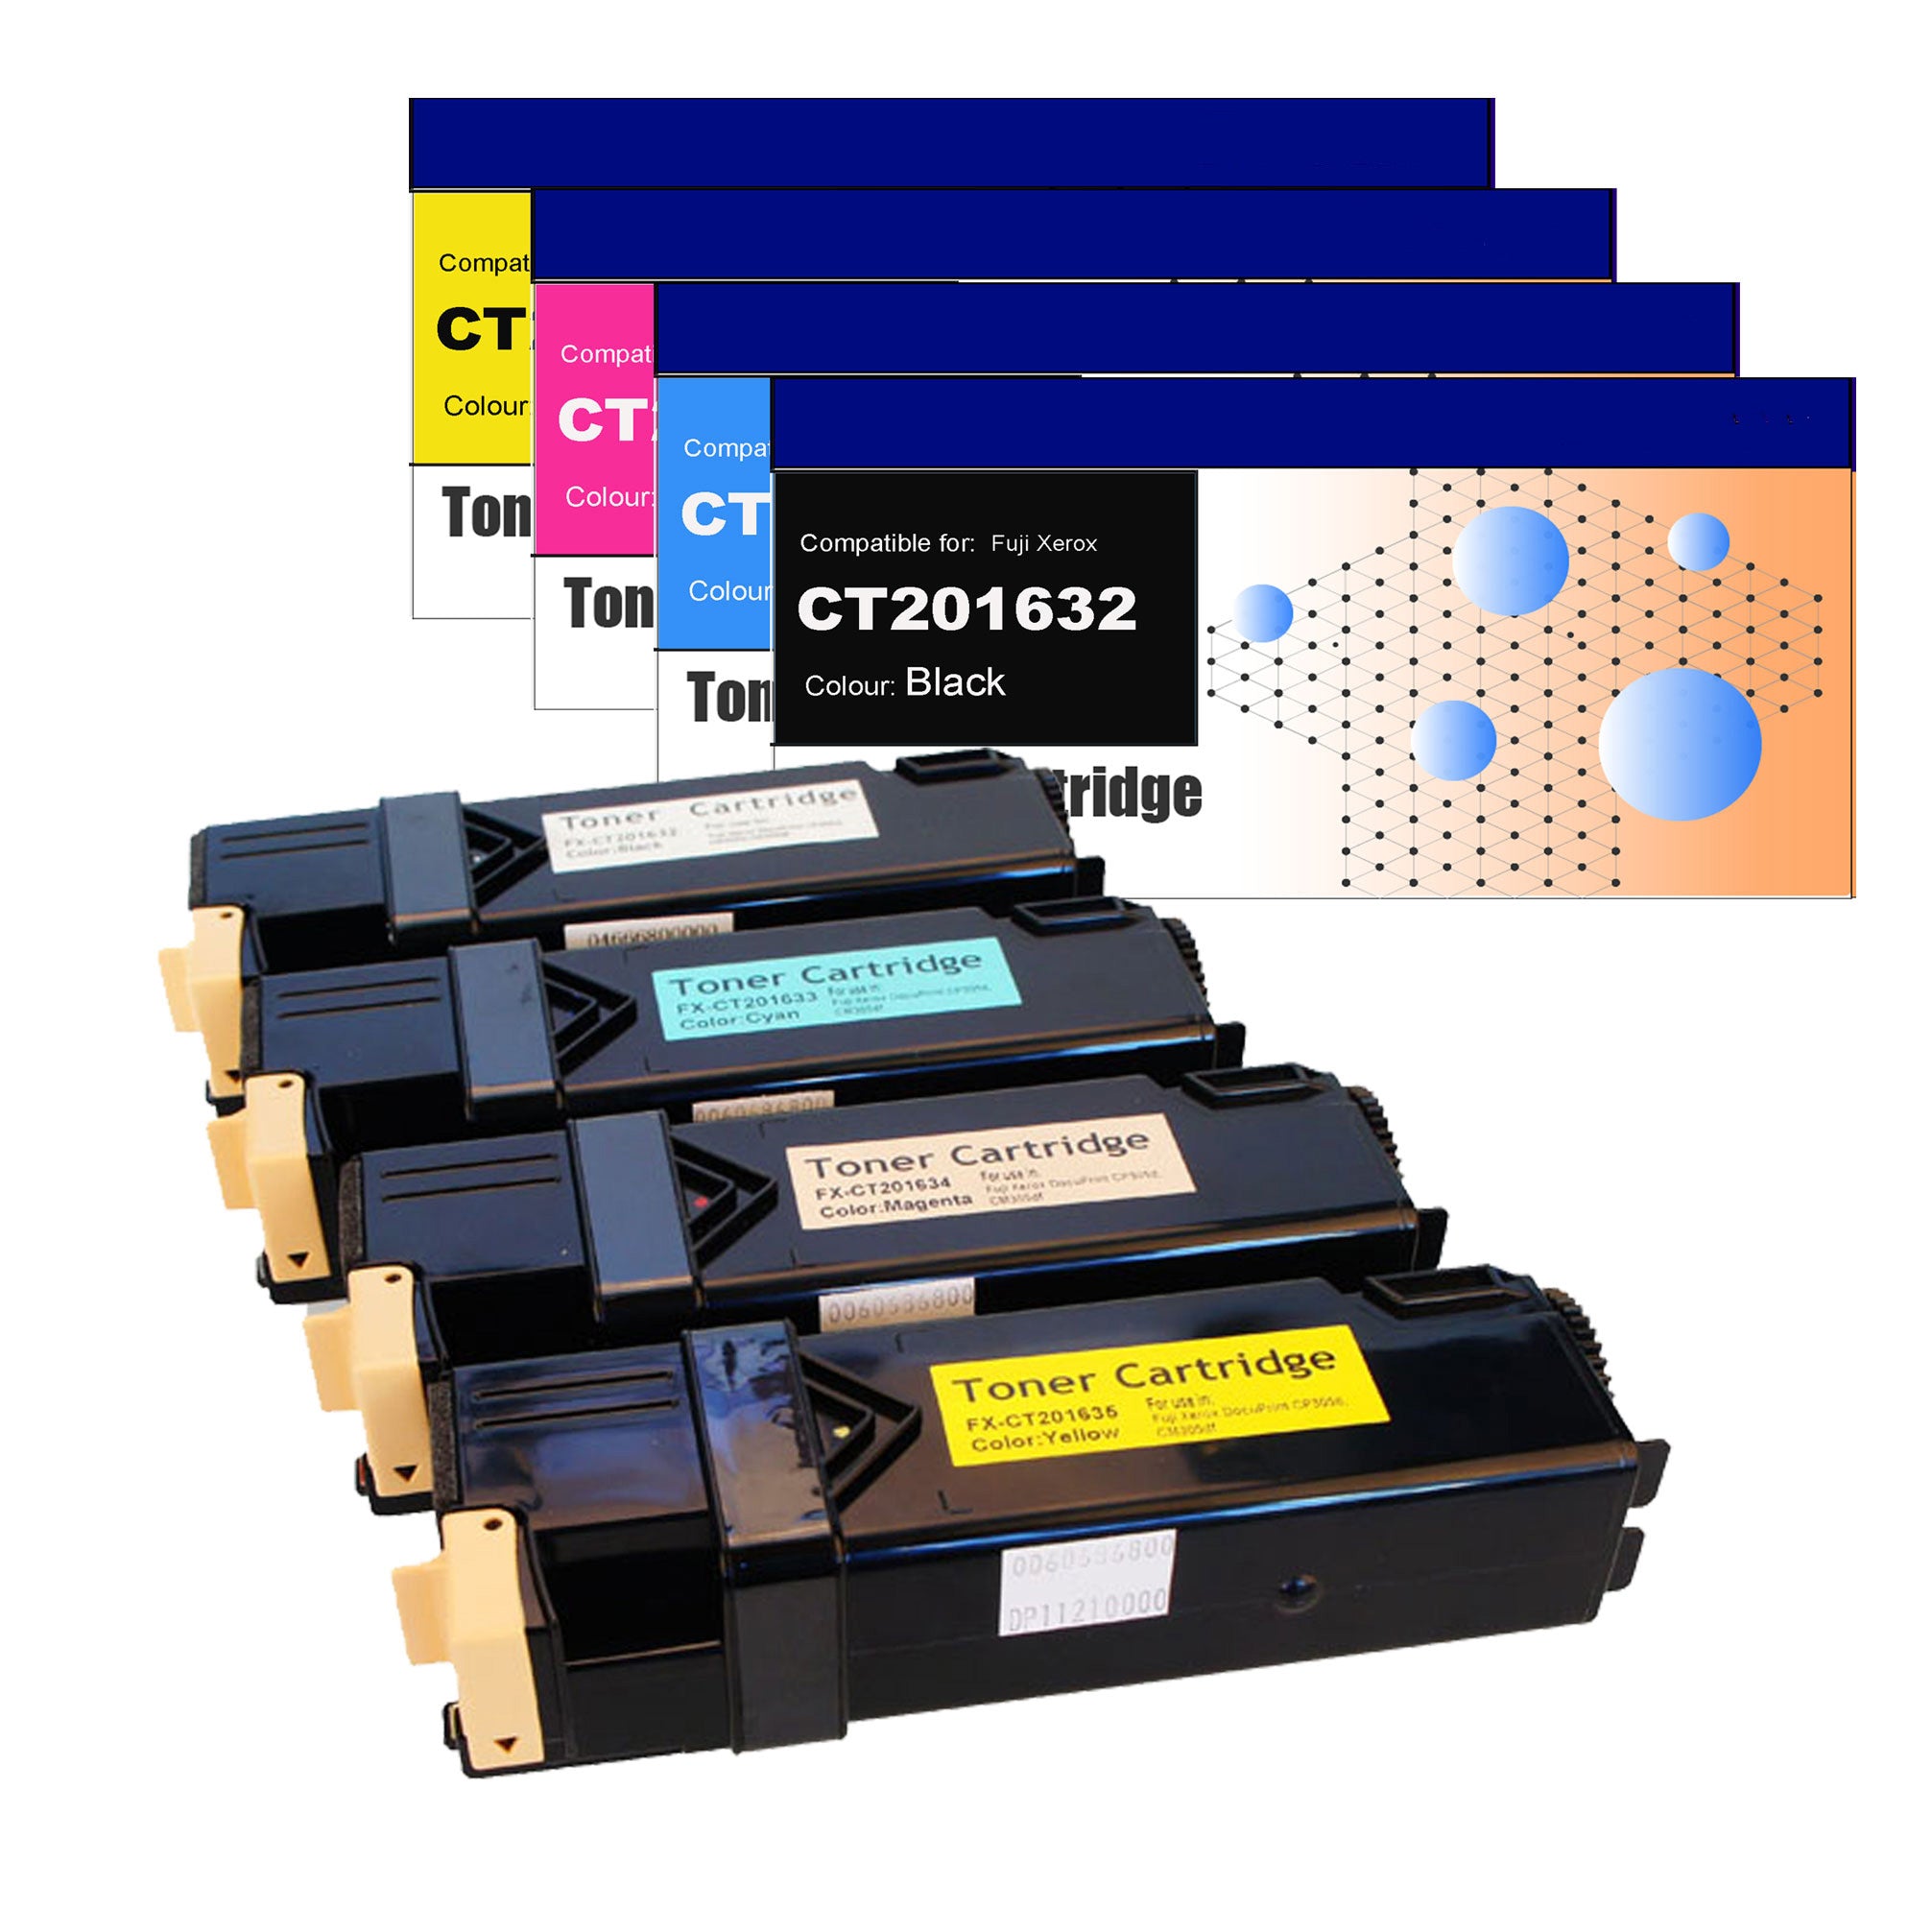 Compatible Toner Cartridges for Fuji Xerox CT201632 / CT201633 / CT201634 / CT201635 (CP305)